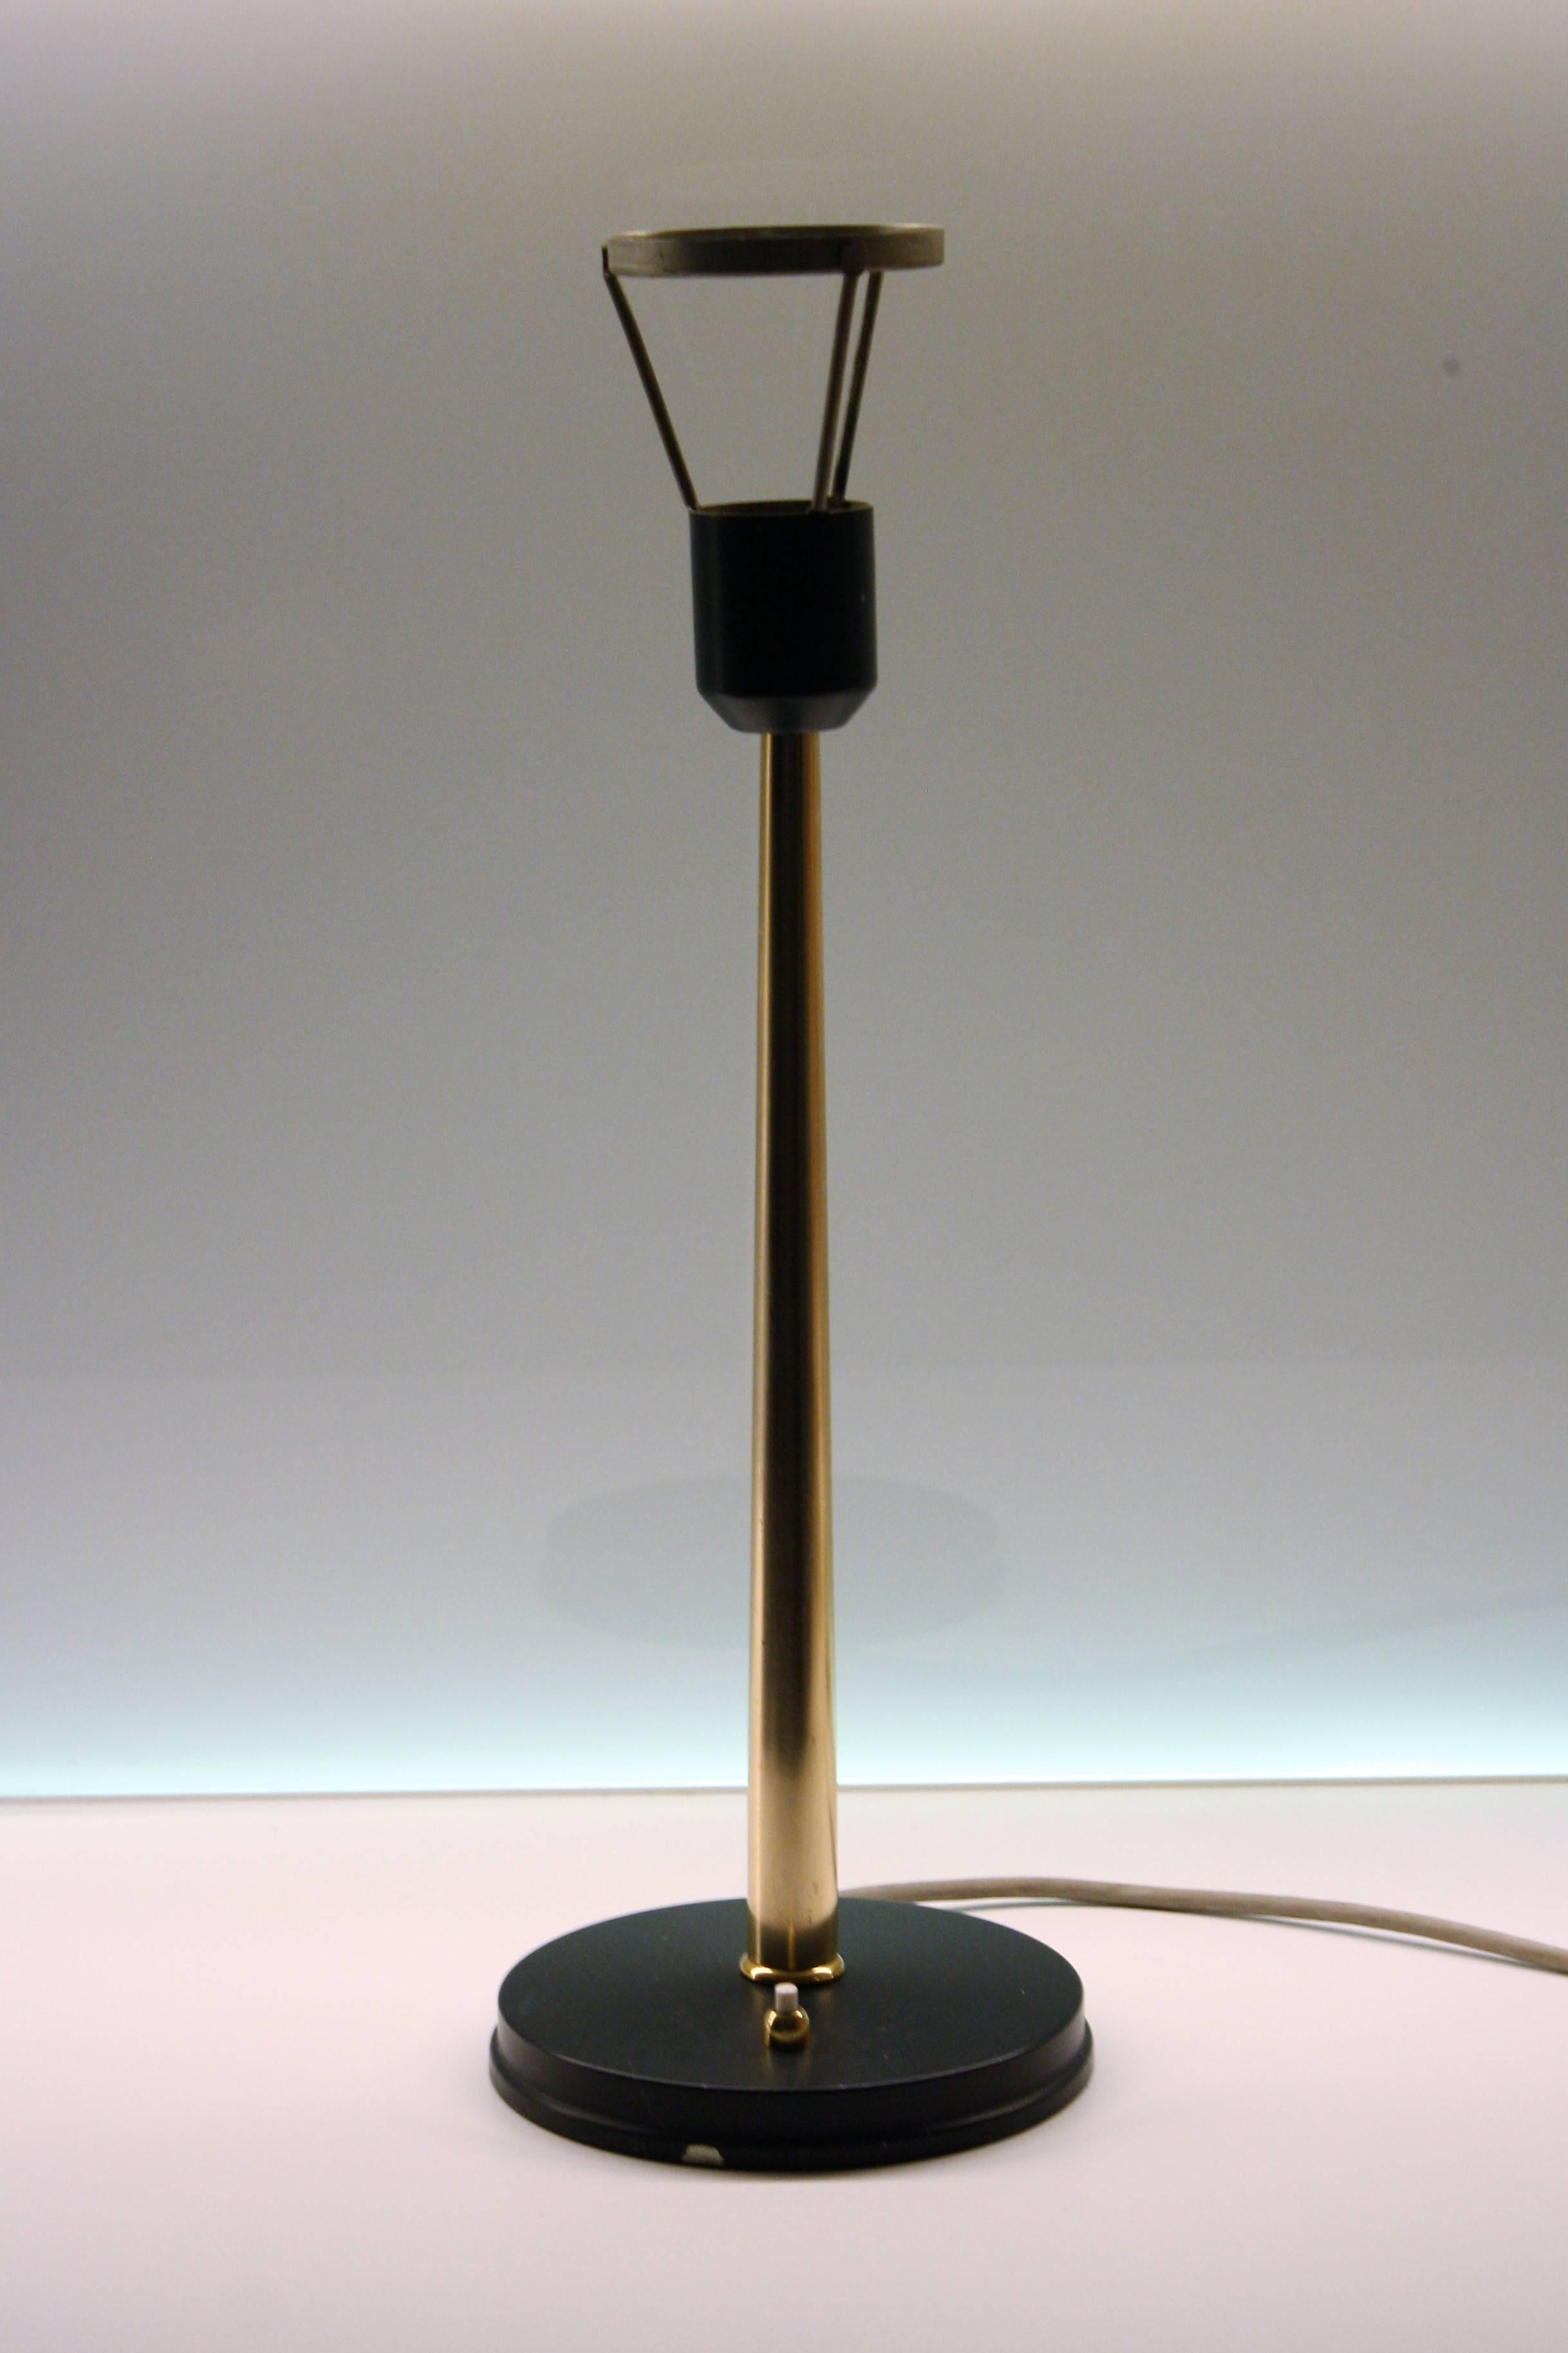 Brass desk lamp by Louis Kalff for Philips.

This ufo inspired desk lamp or table lamp has a dark green coloured metal shade mounted on a brass conical bar. The base features the Philips logo and a brass switch.

The lamp dates from the Space